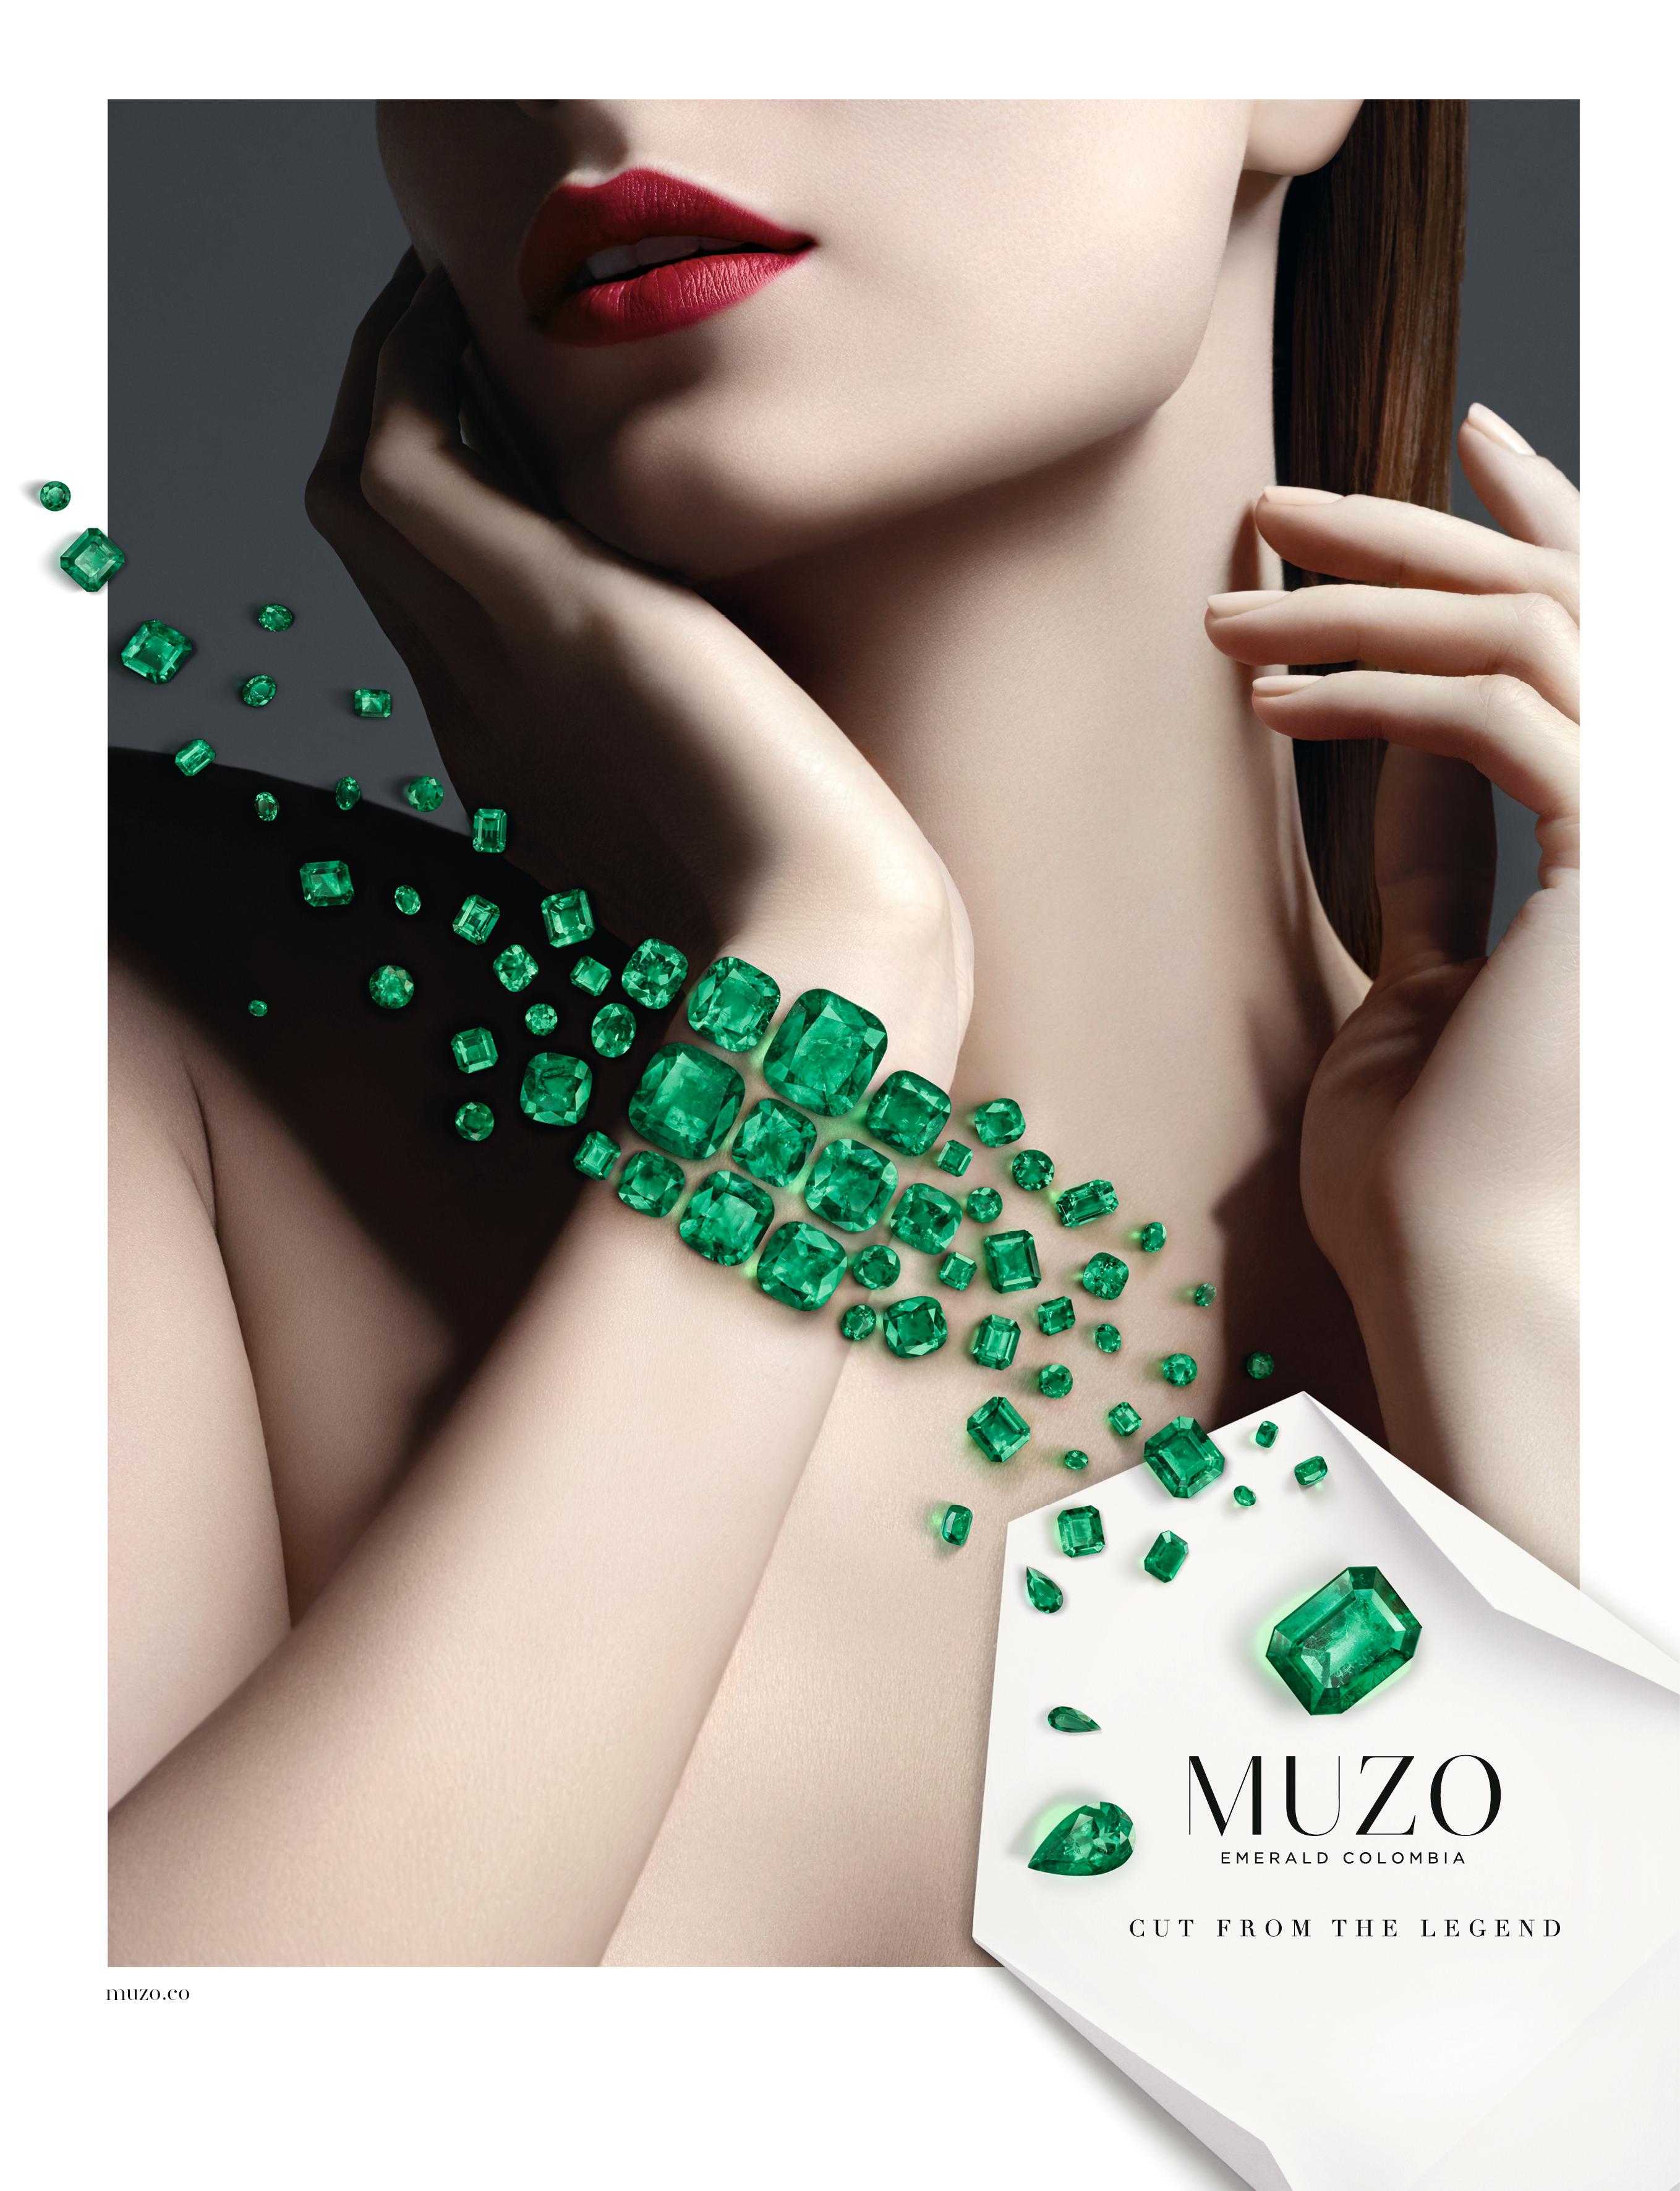 18 Karat Yellow Gold one of a kind classic cuff set with 180.17 carats of Muzo Colombian emerald and round brilliant diamonds weighing 1.5 carats.

Muzo Emerald Colombia Heritage Muisca Bracelet set with 180.17 carats Emerald

Named in honor of the